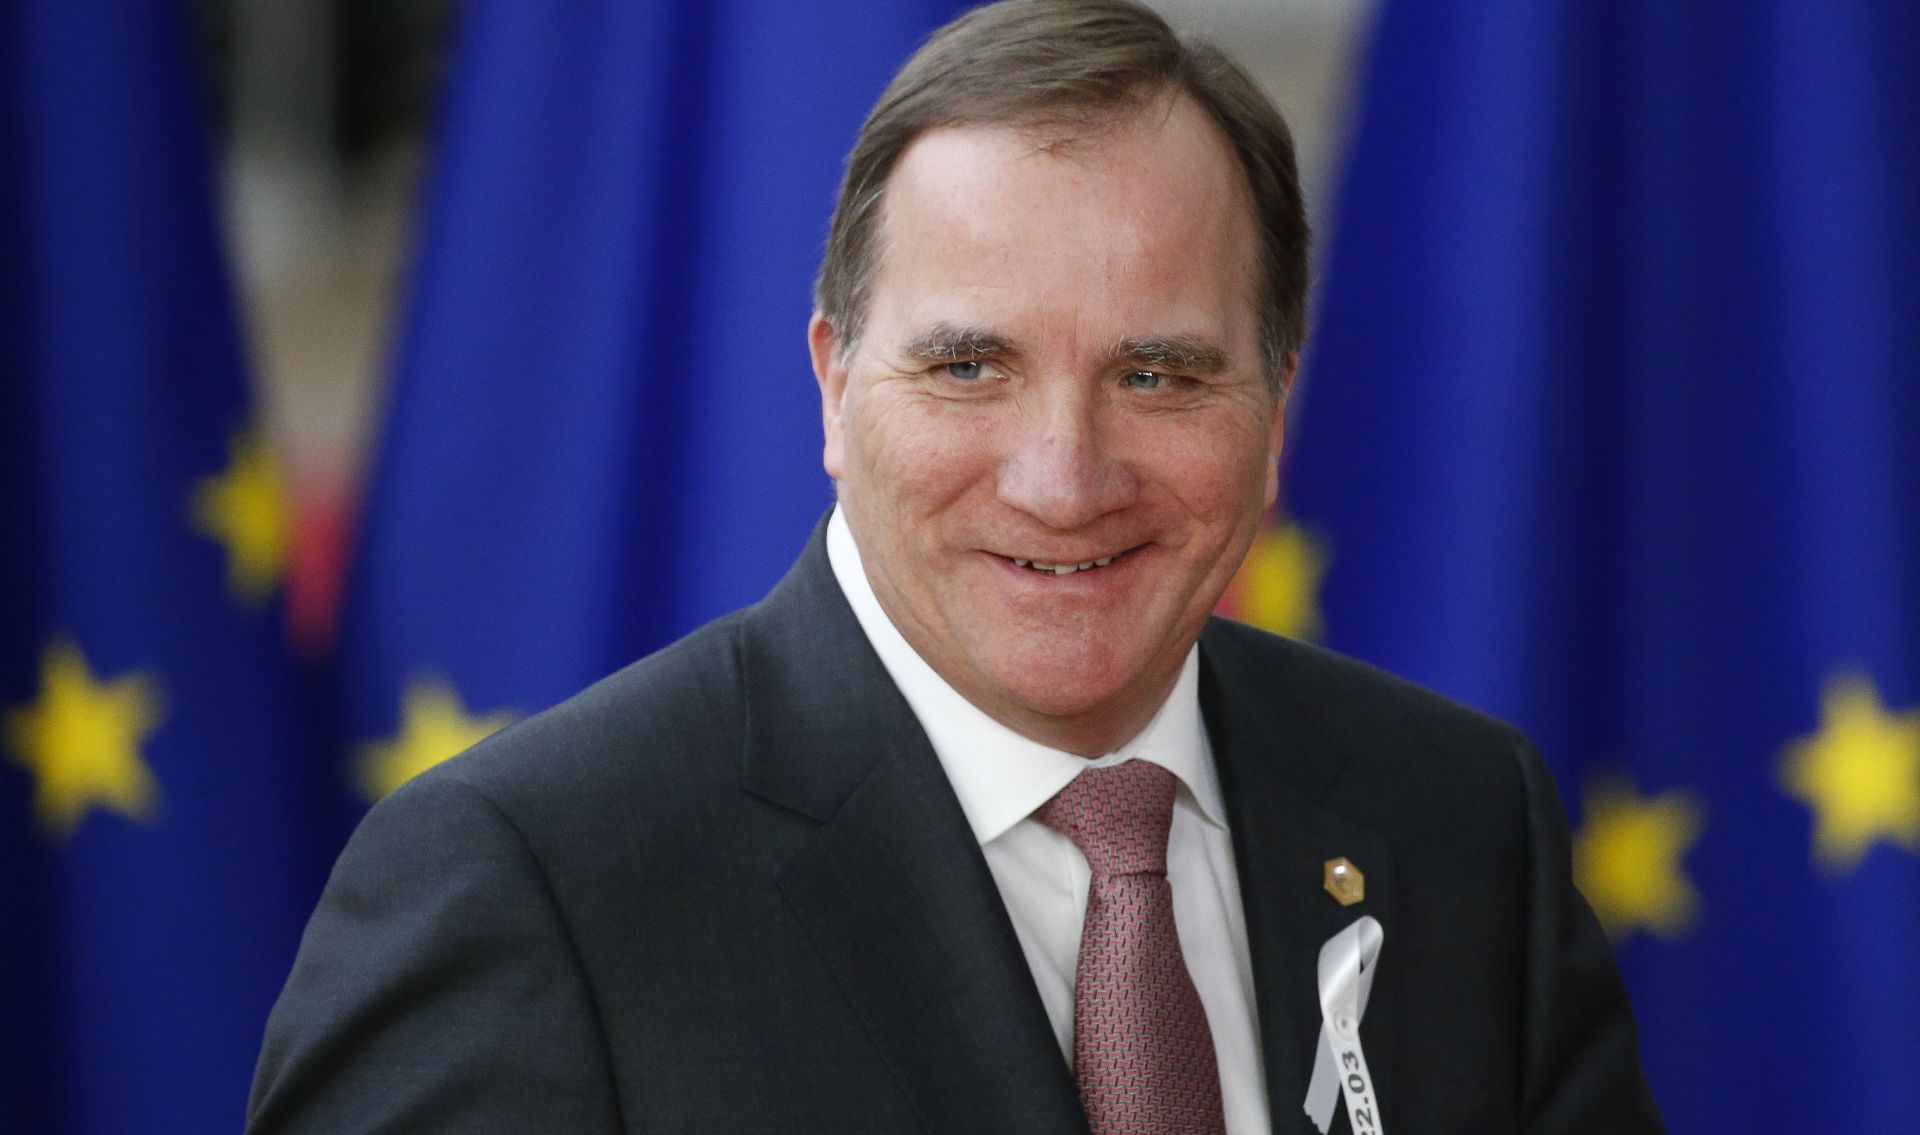 epa07295872 (FILE) - Sweden's then Prime Minister Stefan Lofven arrives for the European Council meeting in Brussels, 22 March 2018 (reissued 18 January 2019)  Swedish Parliament, Riksdagen, on 18 January 2019 voted Stefan Lofven to become the new Prime Minister. It is Lofven's second term in office.  EPA/JULIEN WARNAND